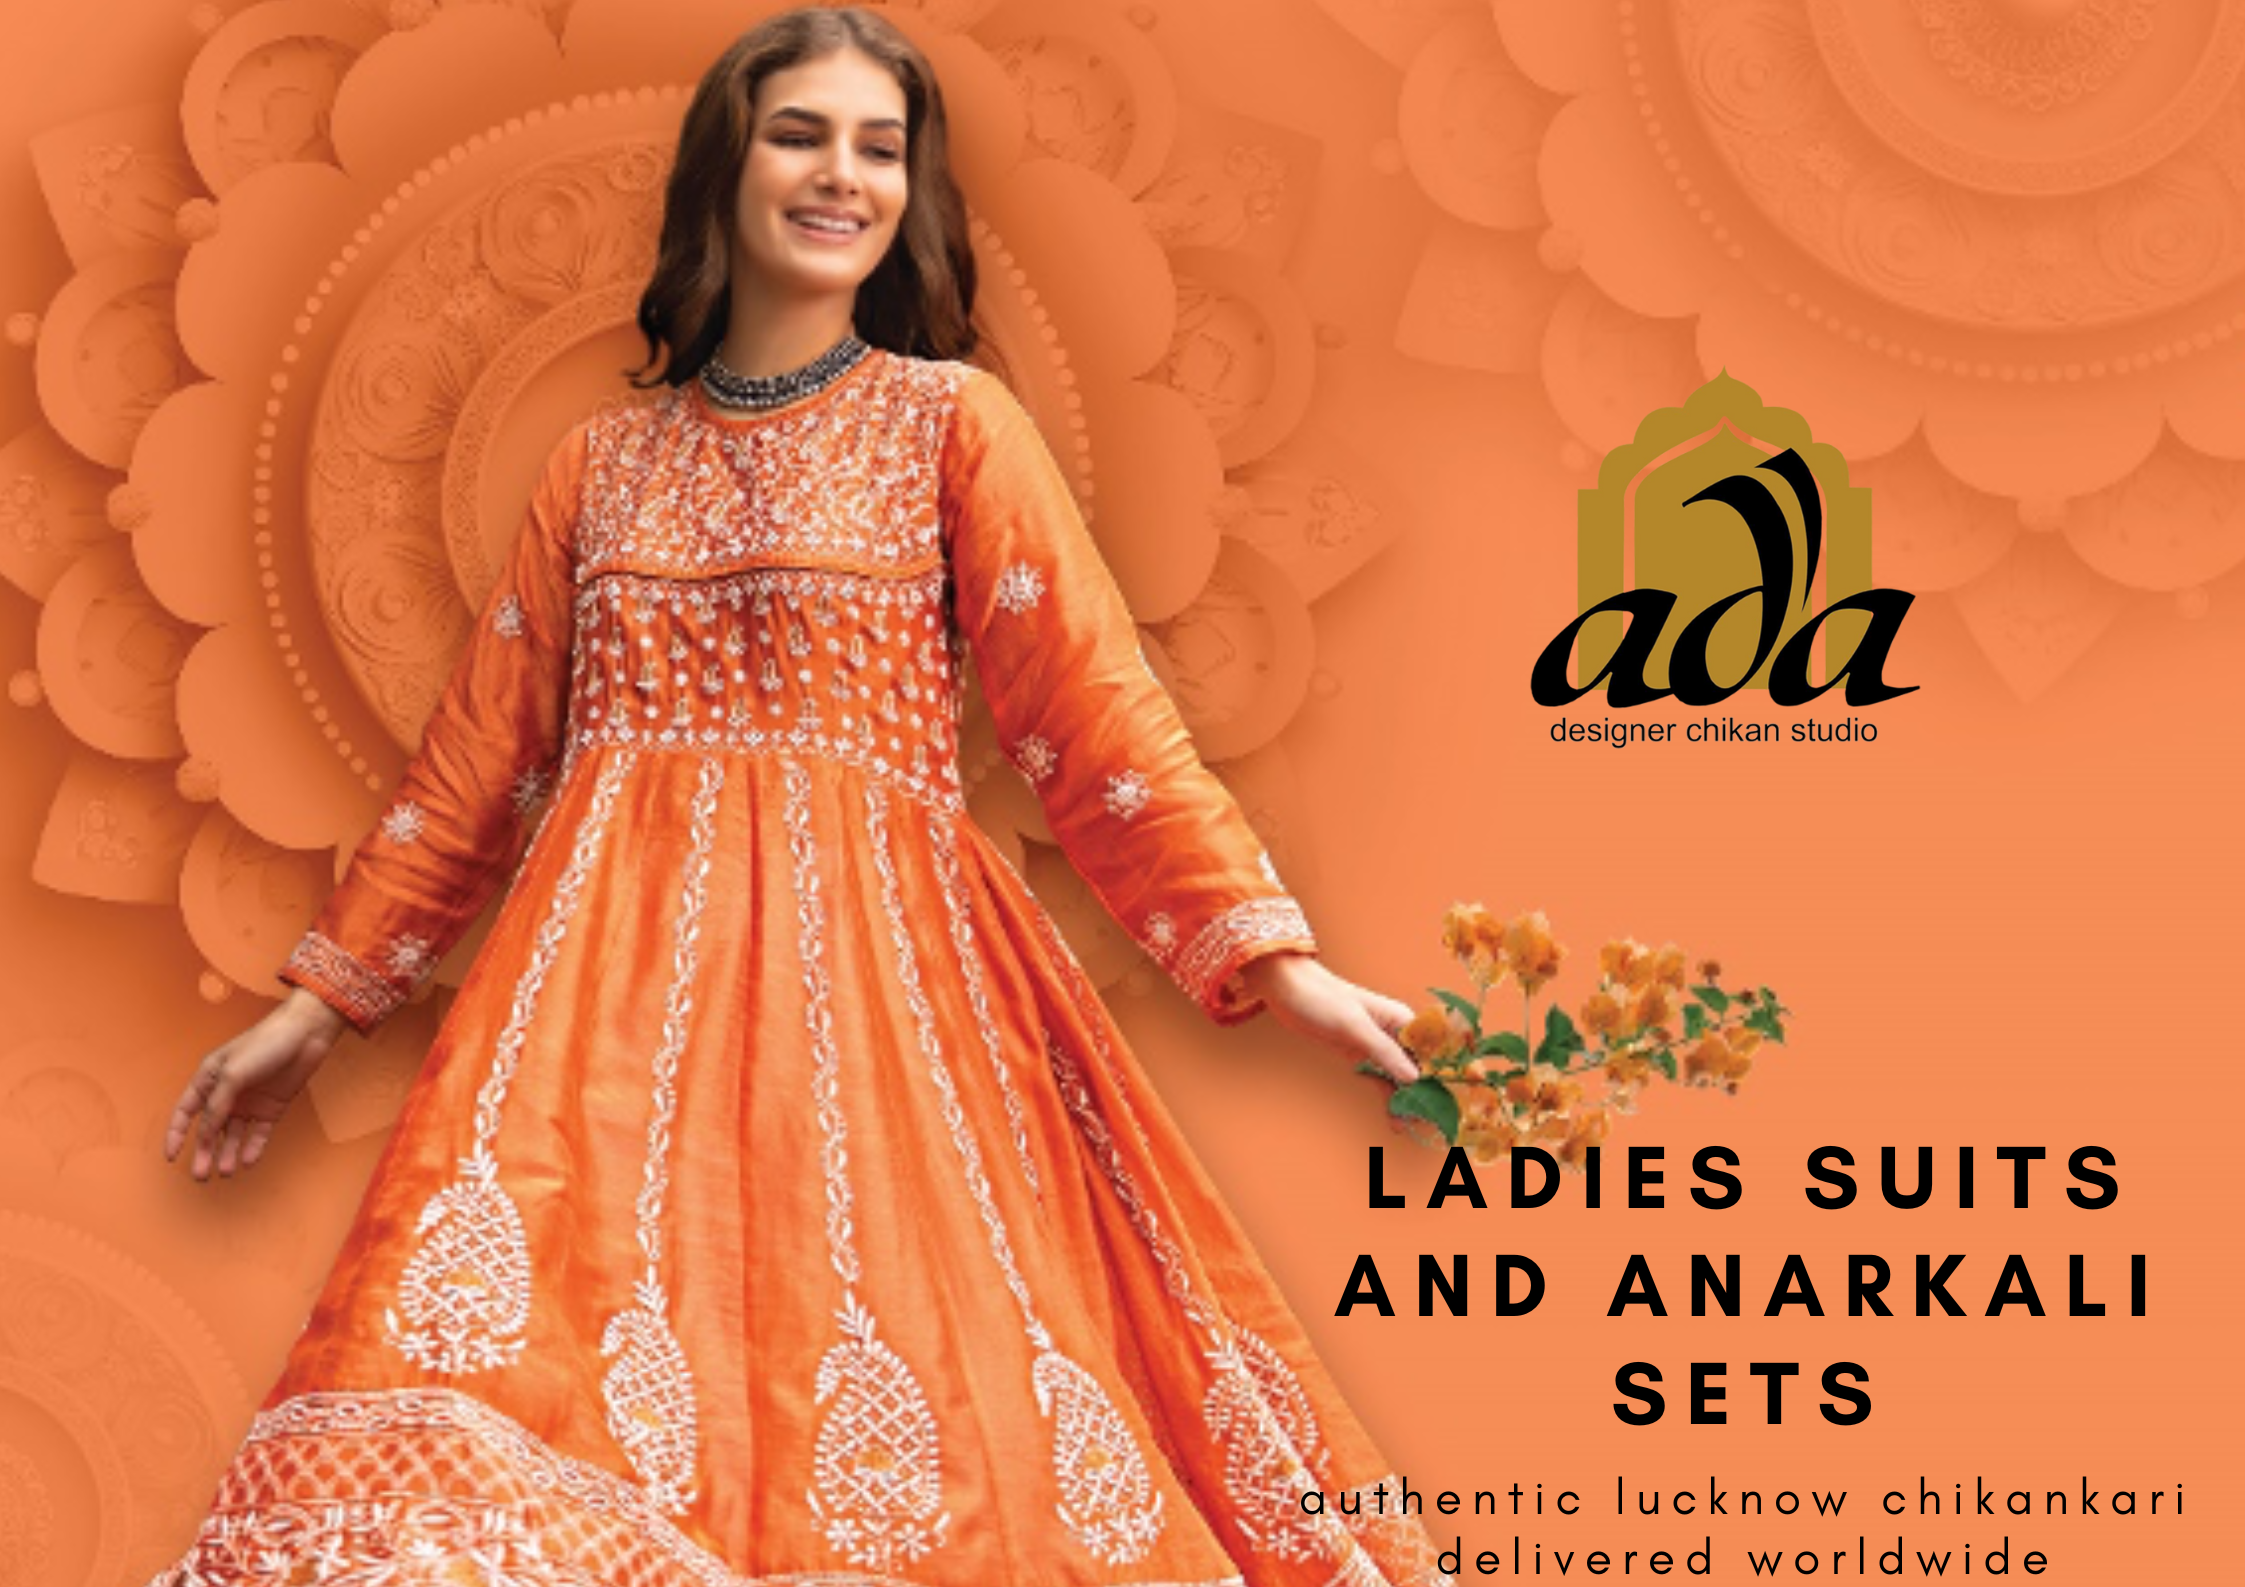 Dressing Up for Eid: A Time-Honored Tradition by ADA Chikan